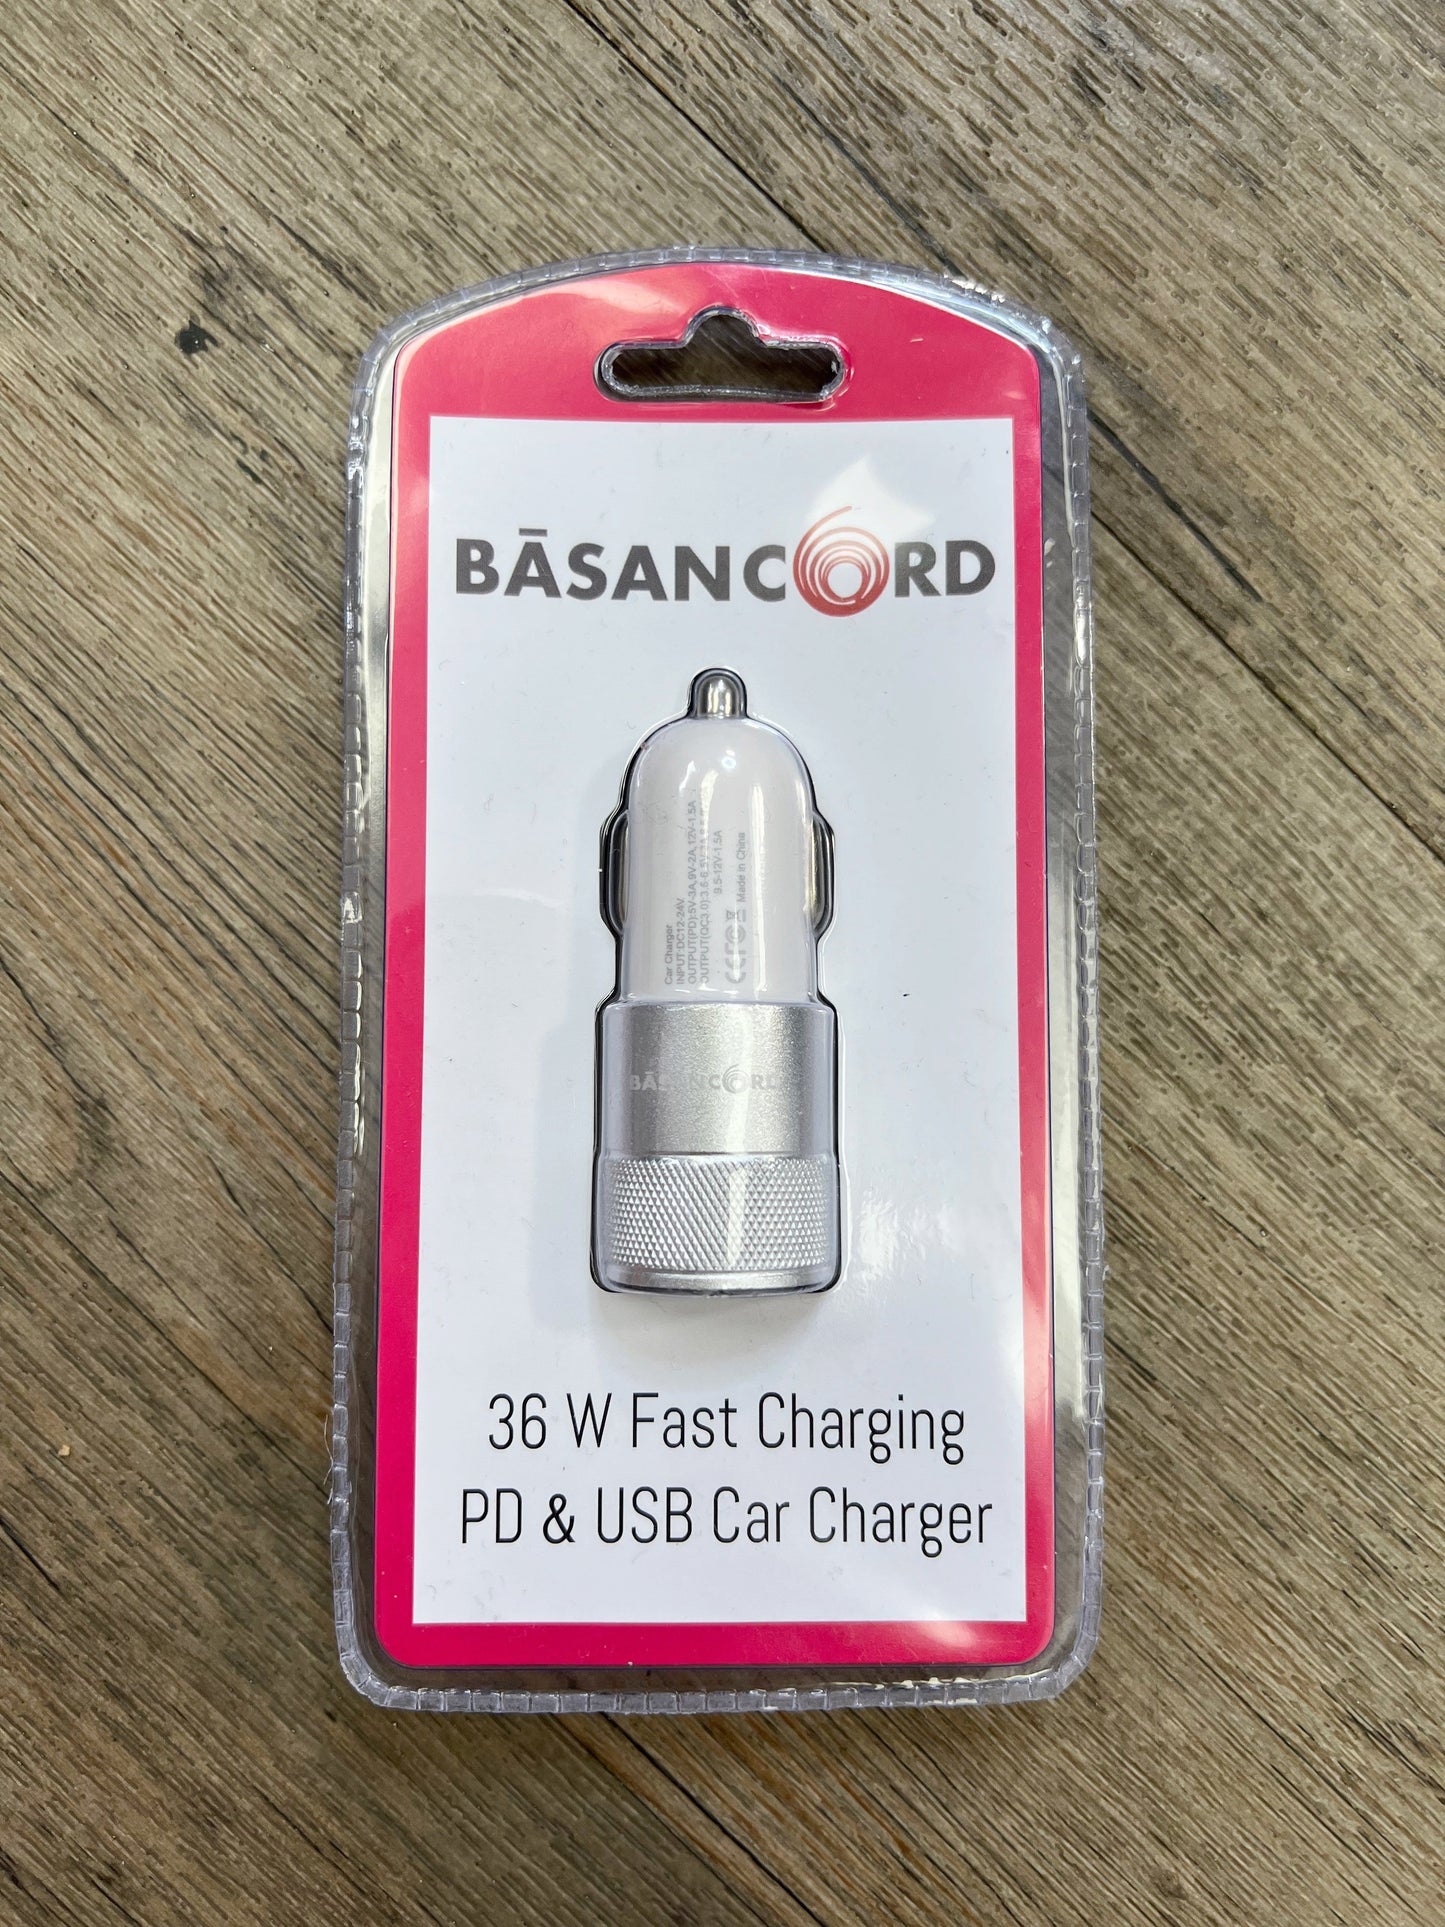 36 W Fast Charging PD & USB Car Charger